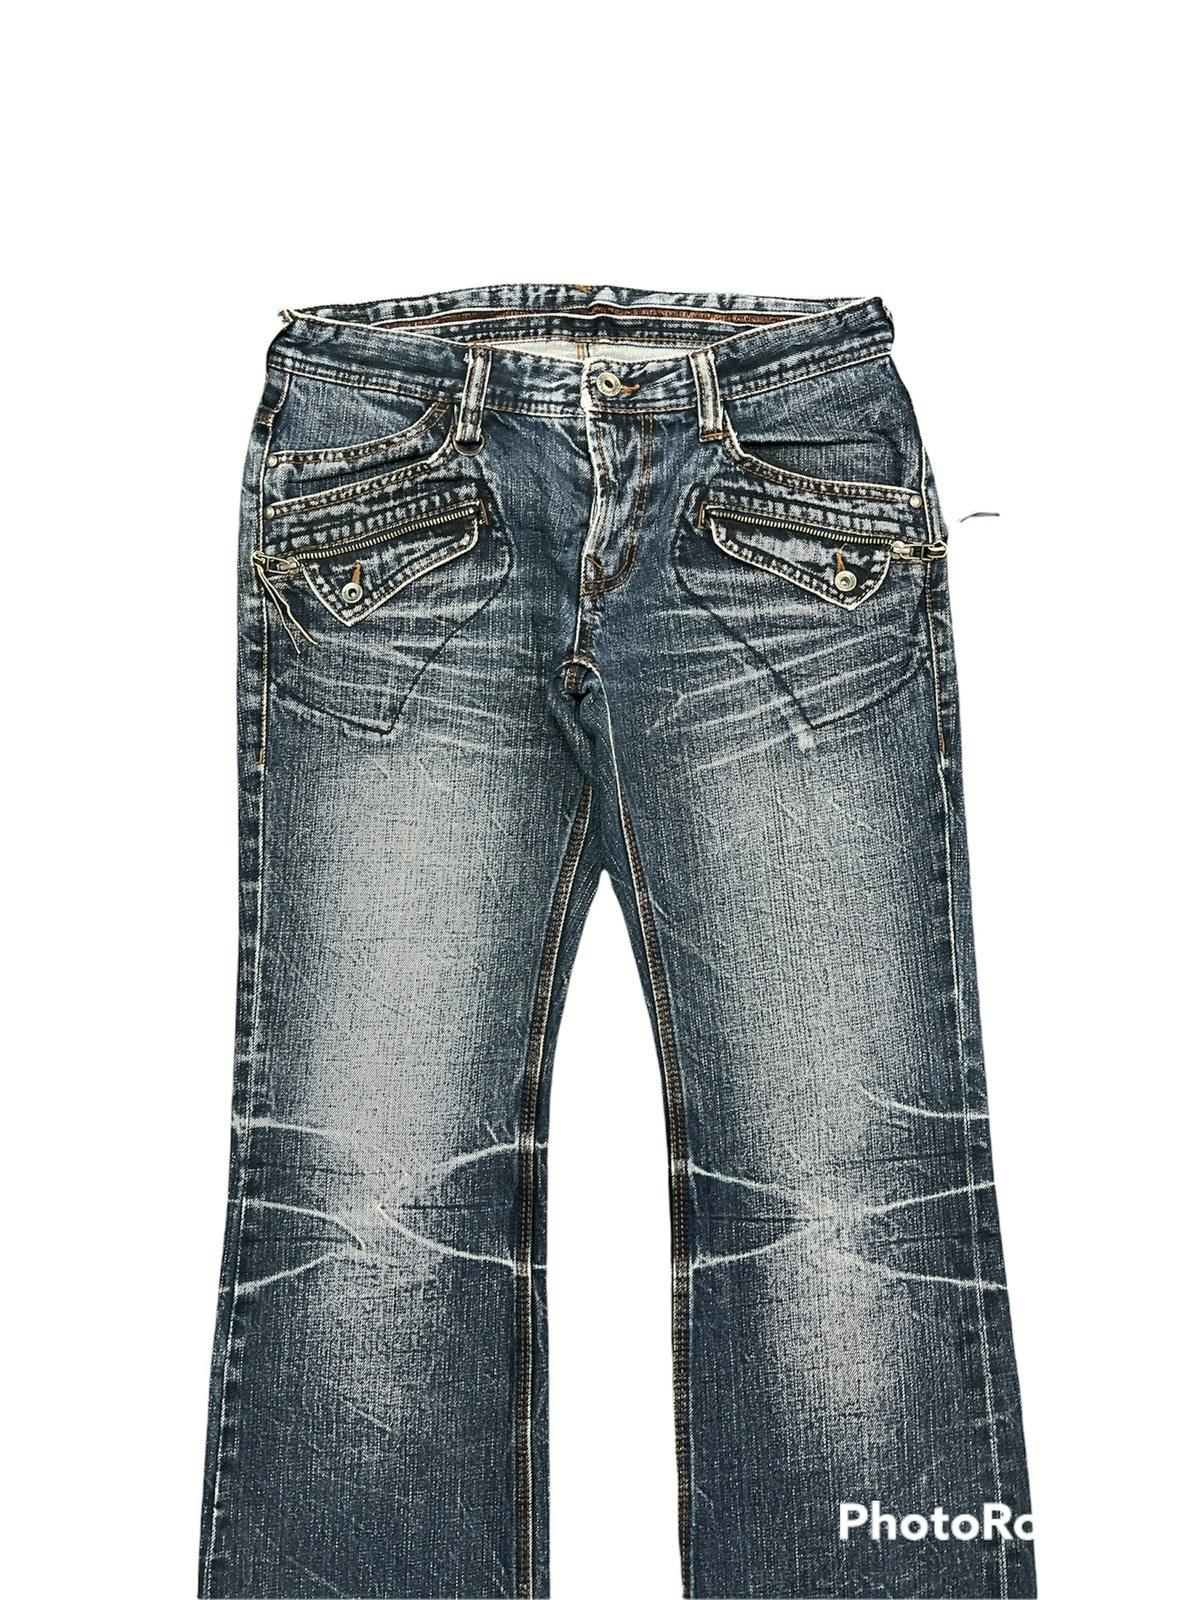 Distressed Japan Blue Flare by Nicole Club For Men Denim - 3